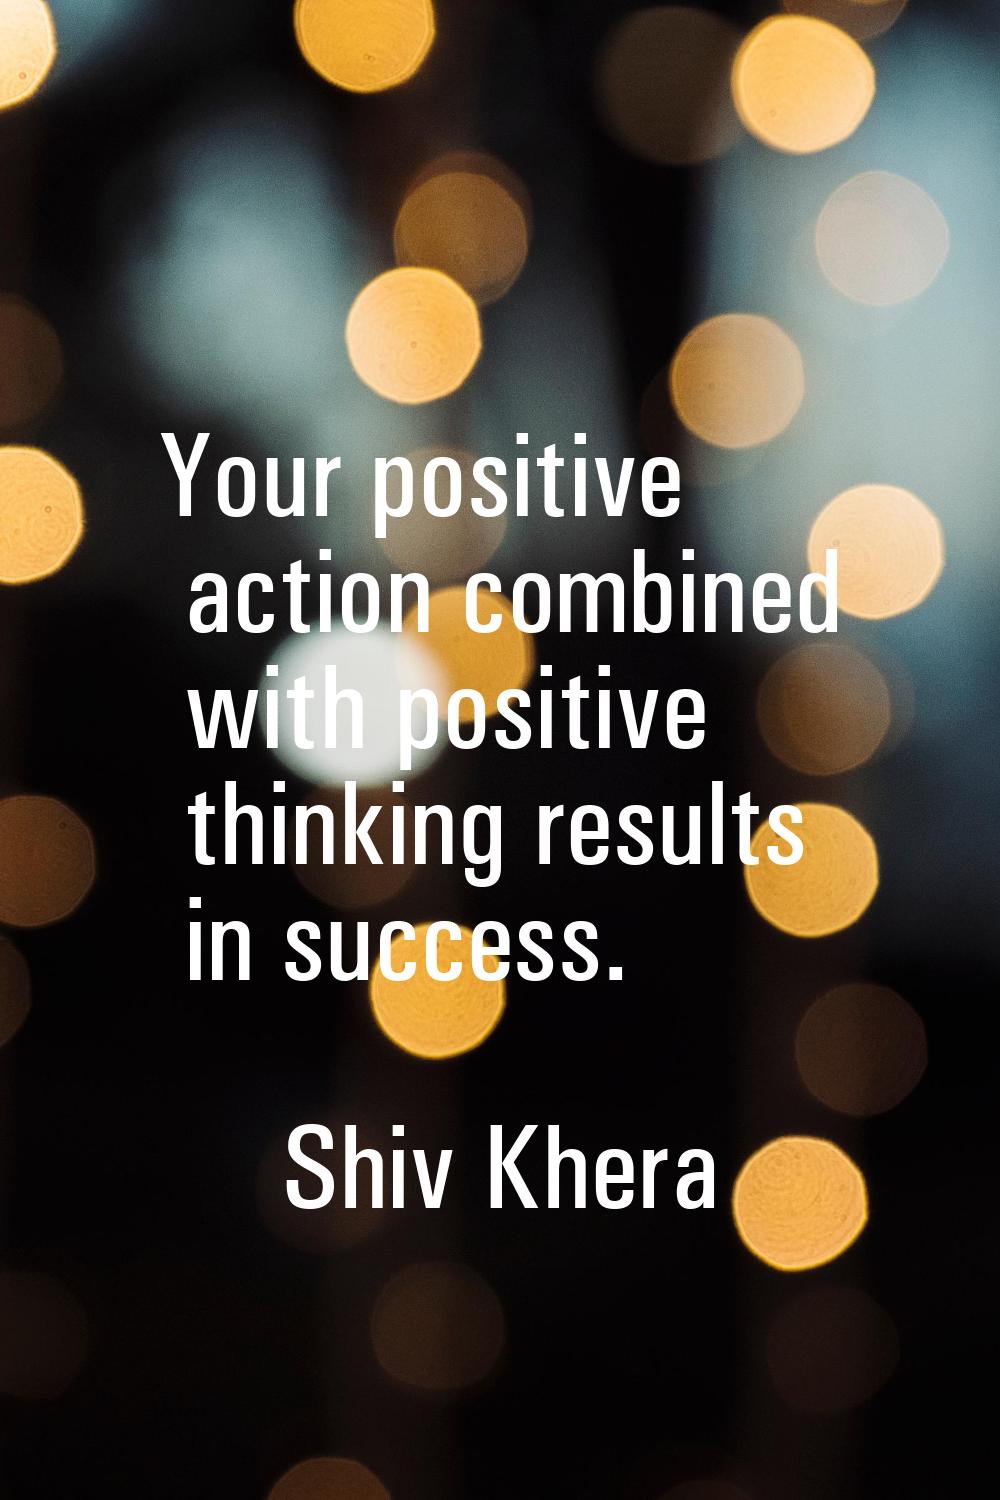 Your positive action combined with positive thinking results in success.